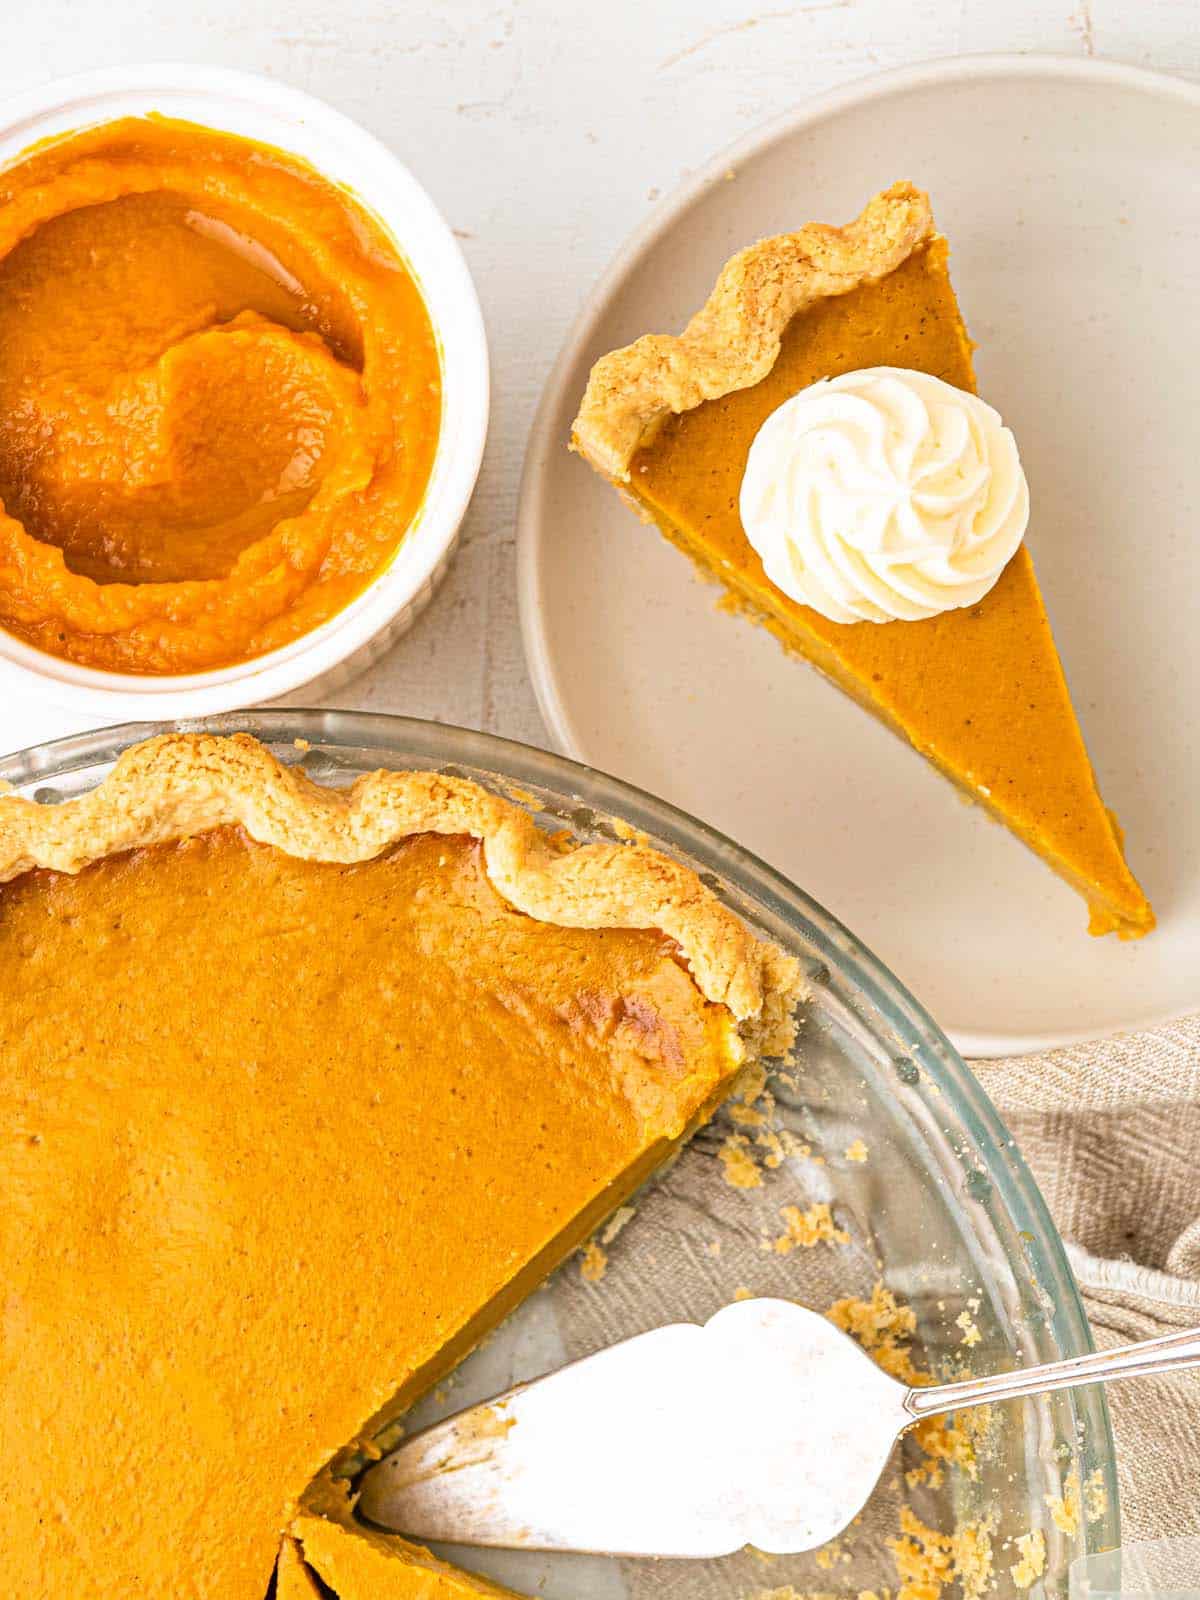 Pumpkin pie in a flaky crust topped with whipped cream